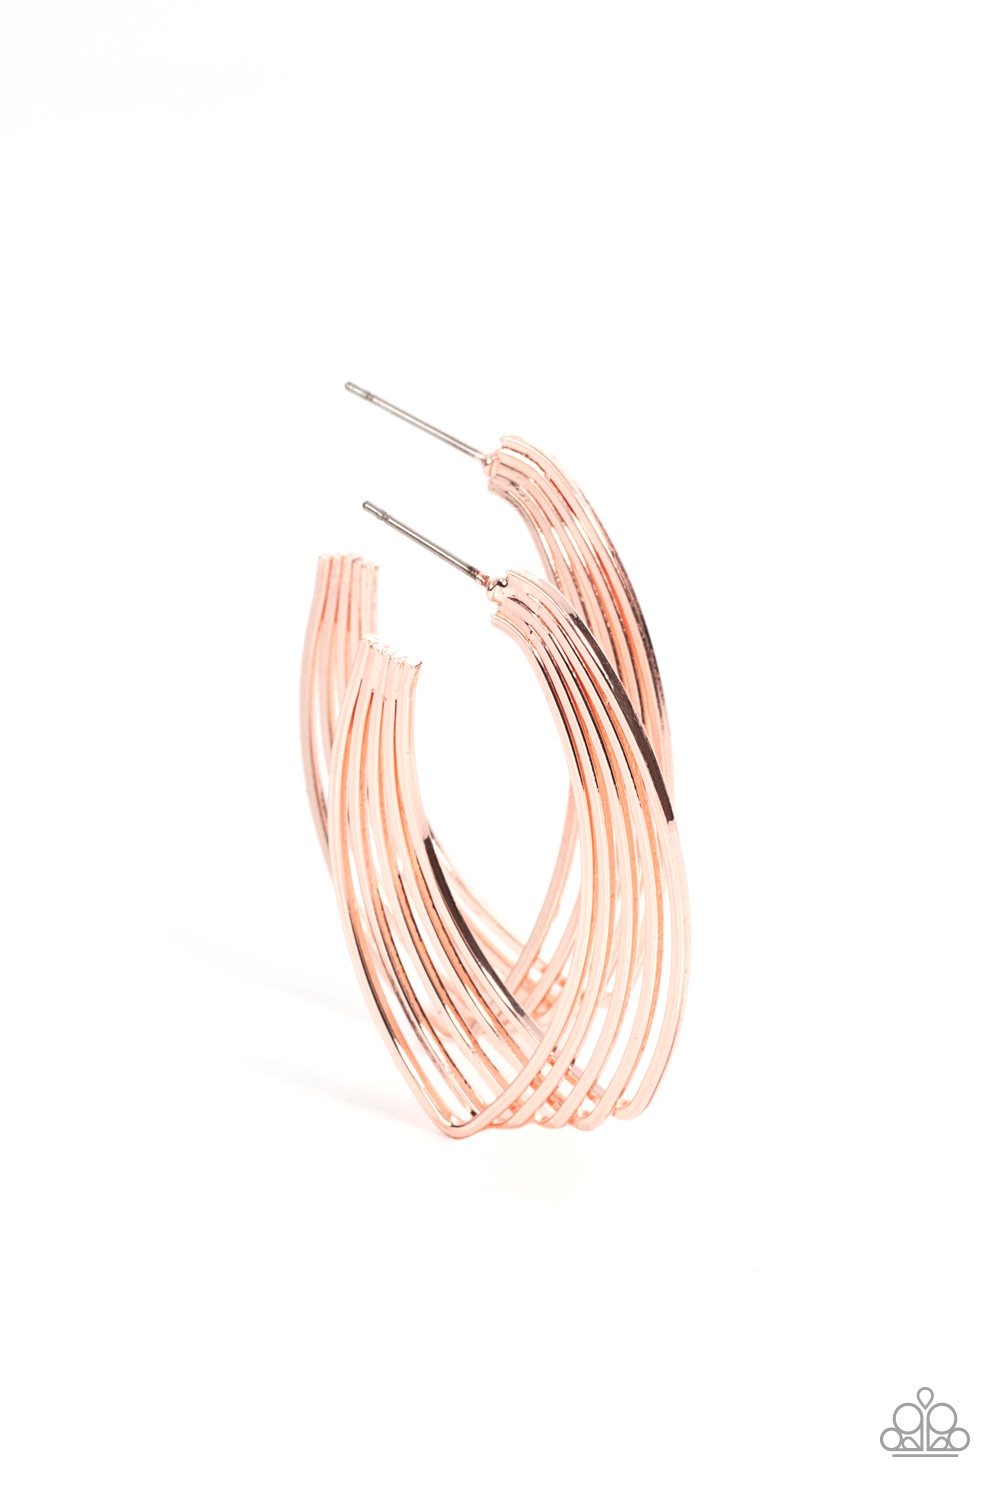 Earring - Industrial Illusion - Rose Gold